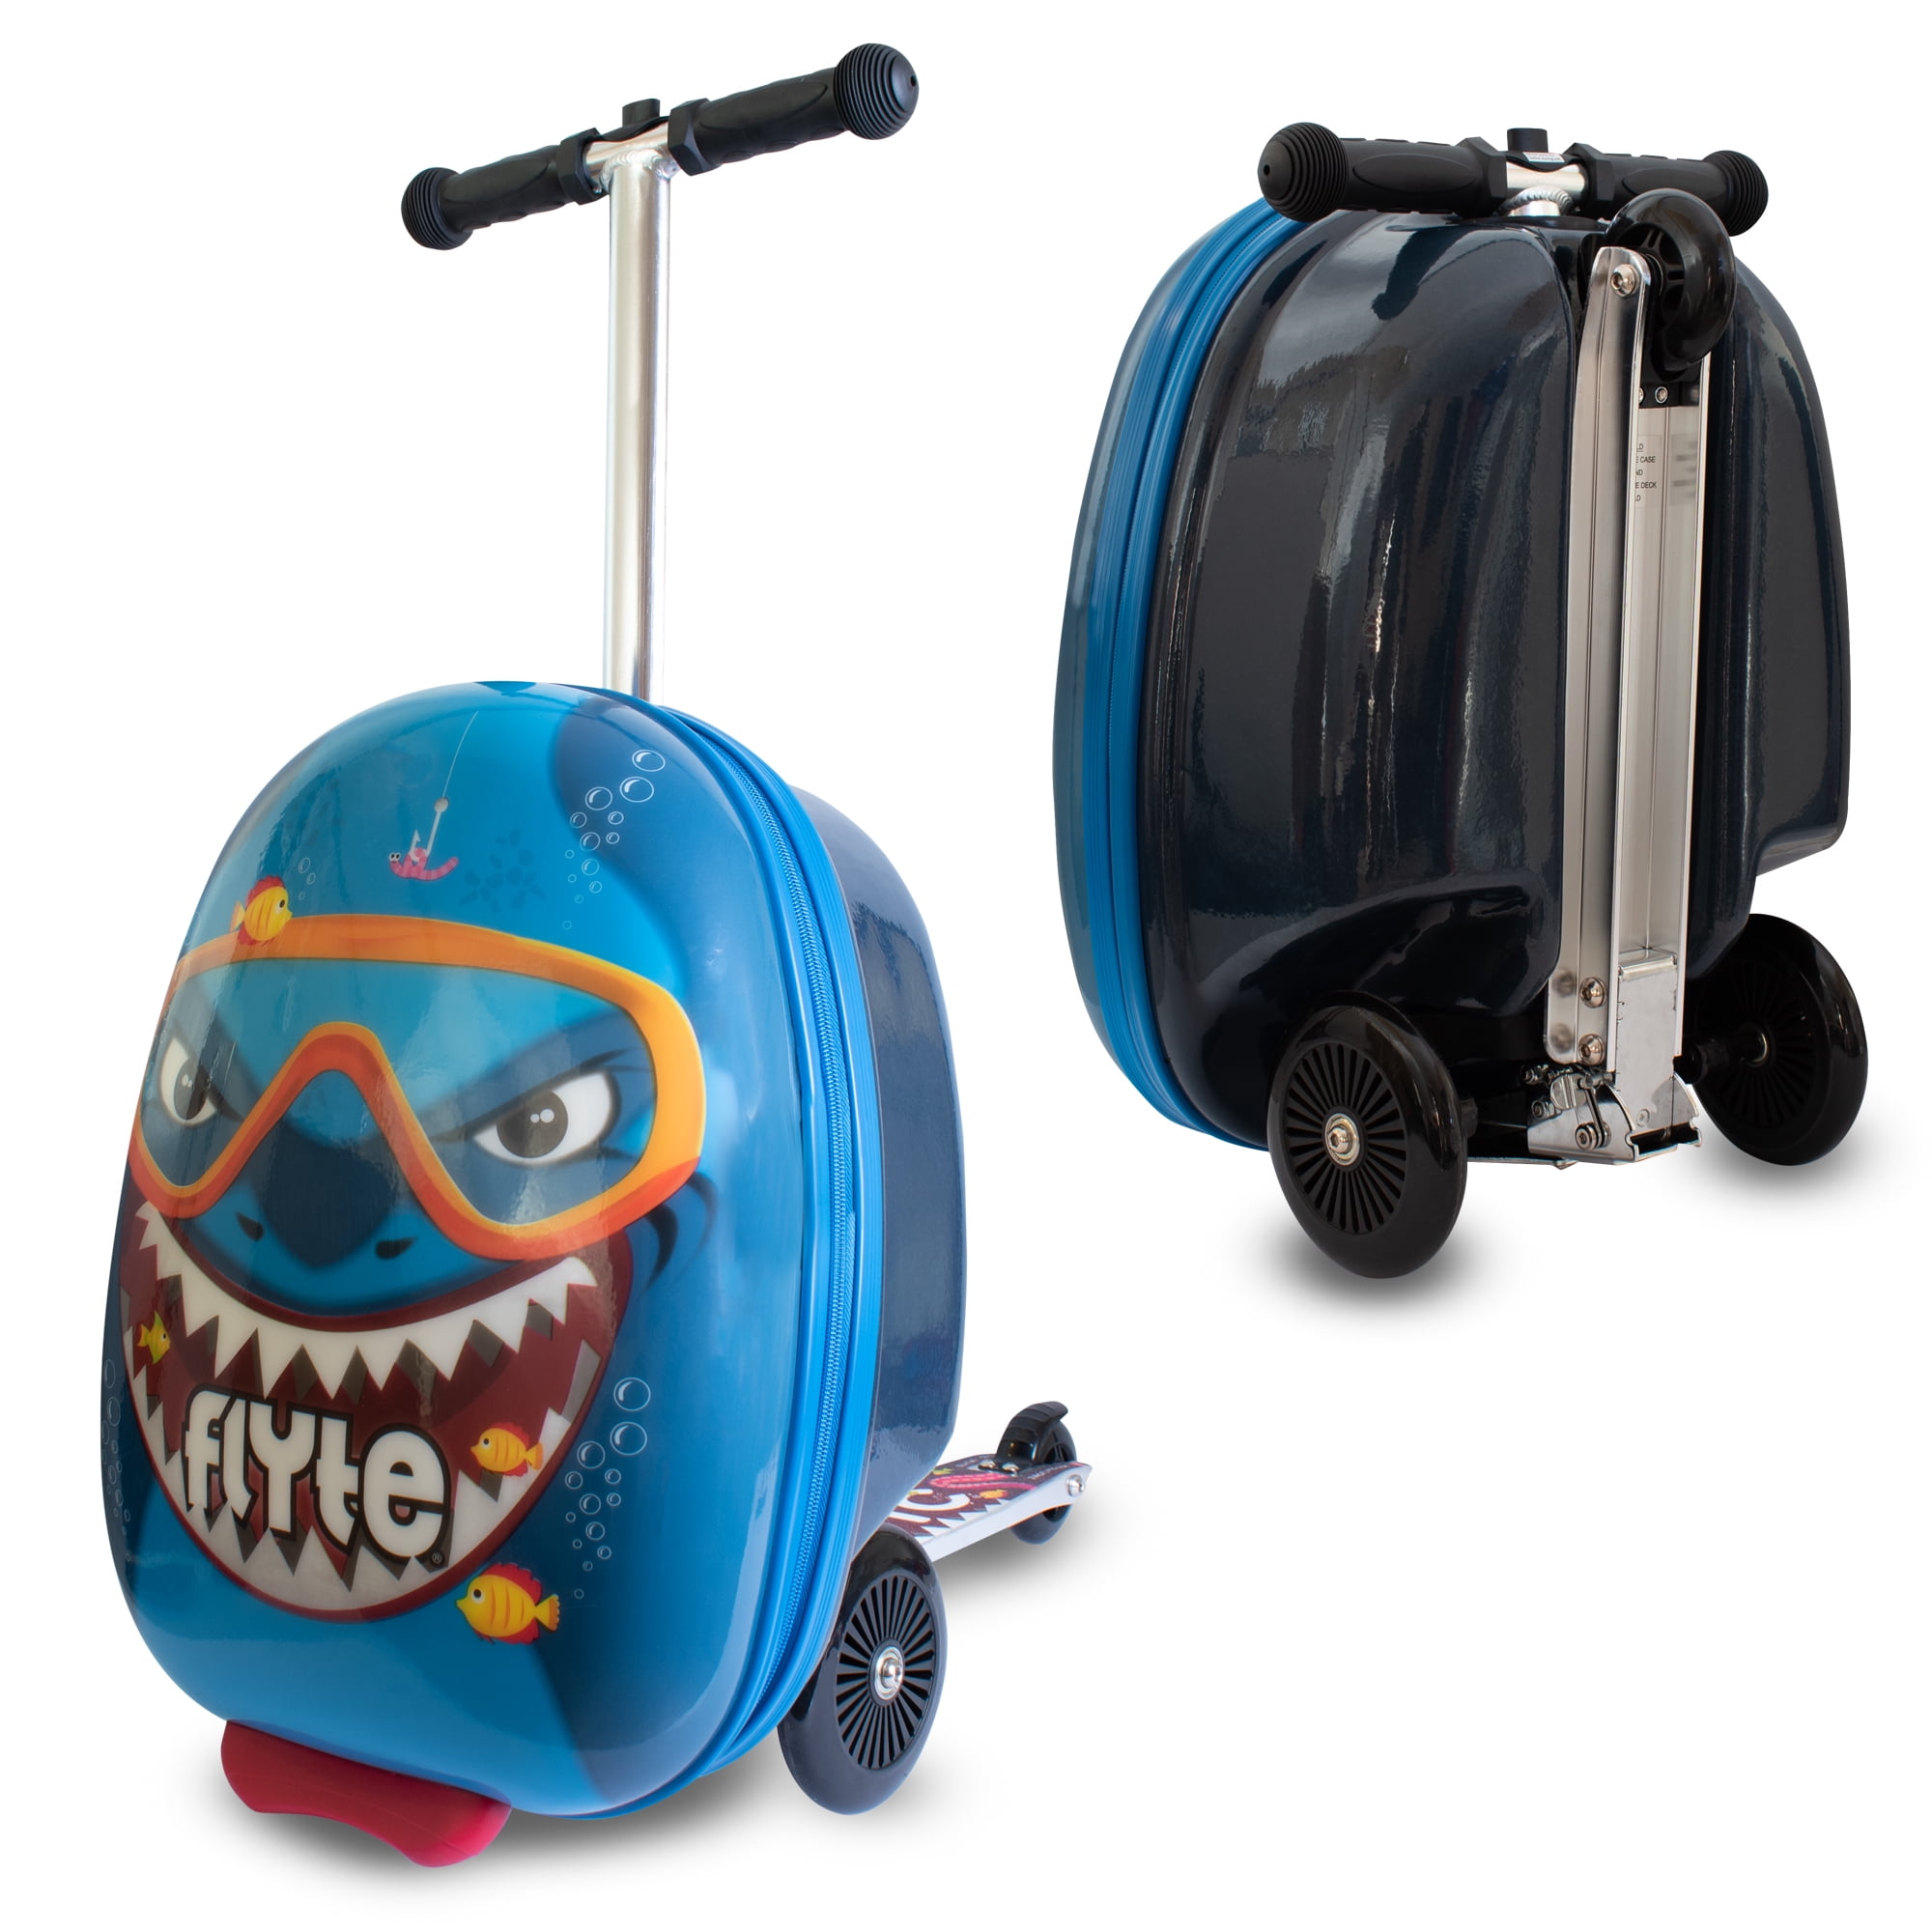 Flyte Scooter Suitcase Folding Kids Luggage – Stormy the Shark, 18 Inch  Hardshell, Ride On with Wheels, 2-in-1, 25 Litre Capacity